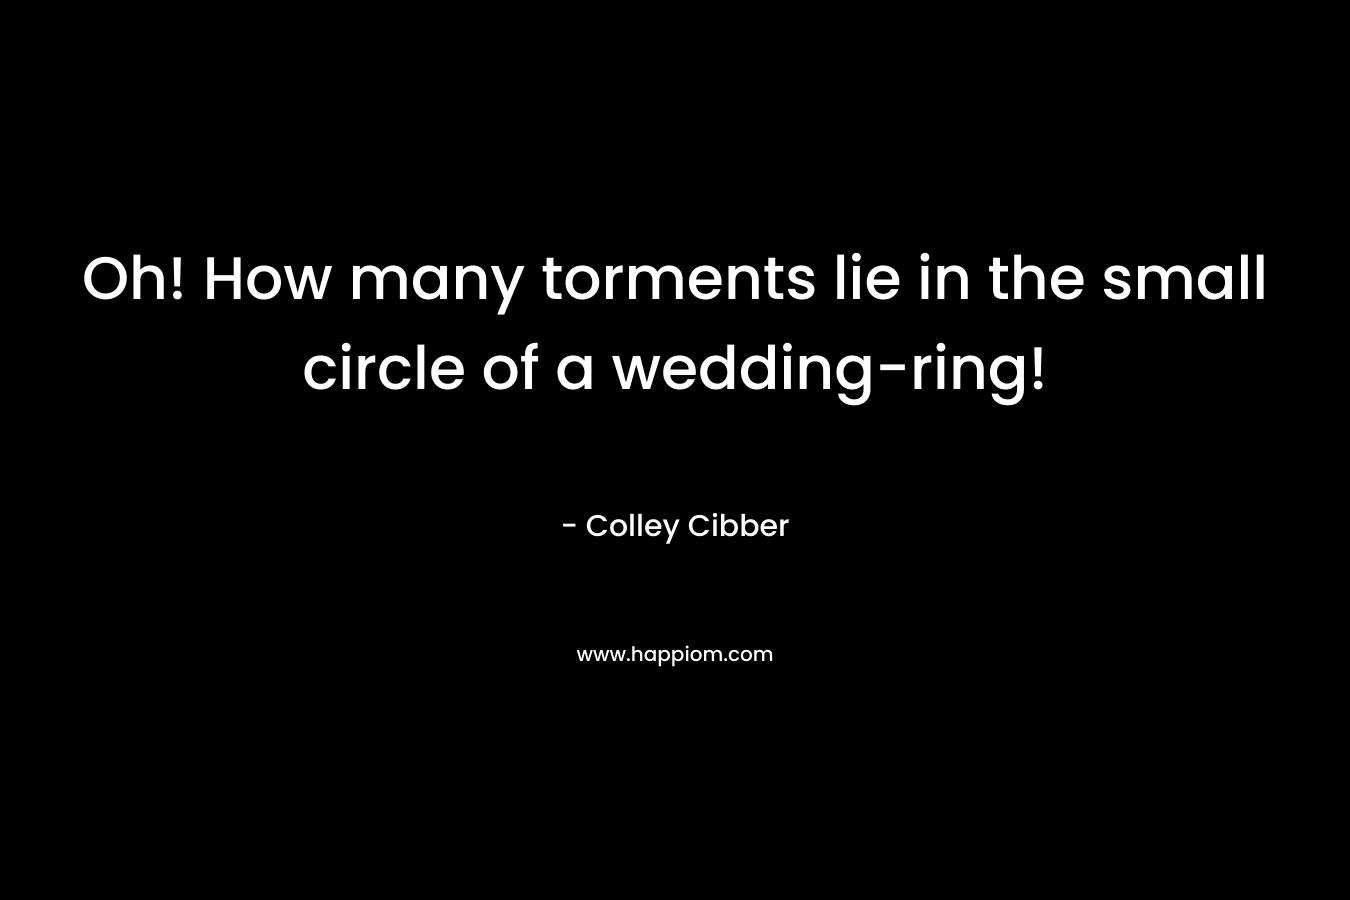 Oh! How many torments lie in the small circle of a wedding-ring!